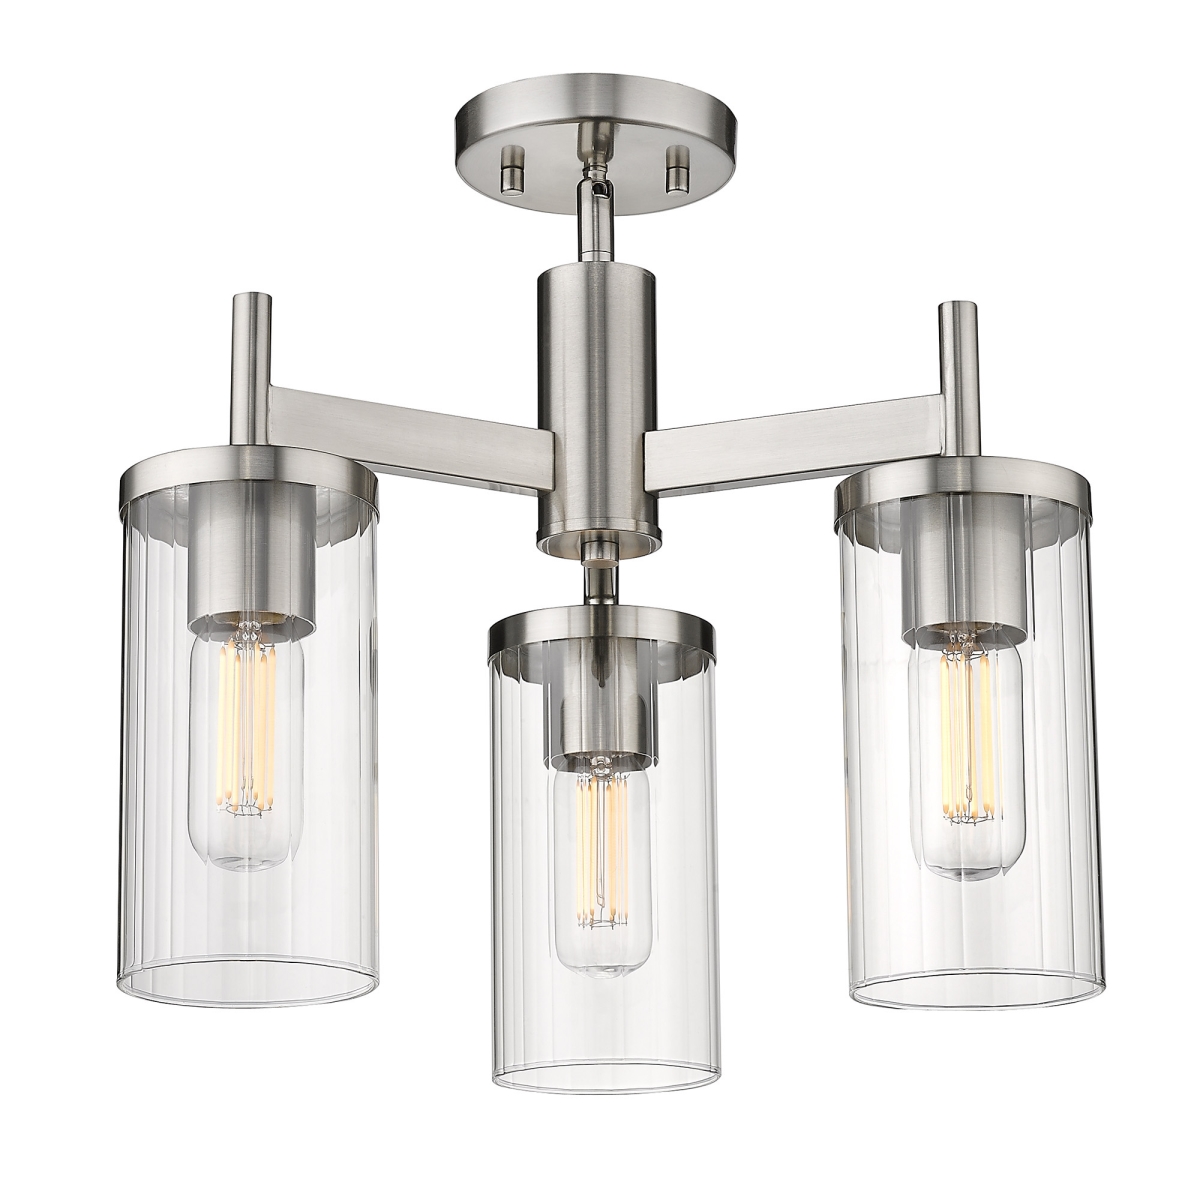 7011-3sf Pw-clr Winslett 3 Light In Pewter With Ribbed Clear Glass Shade